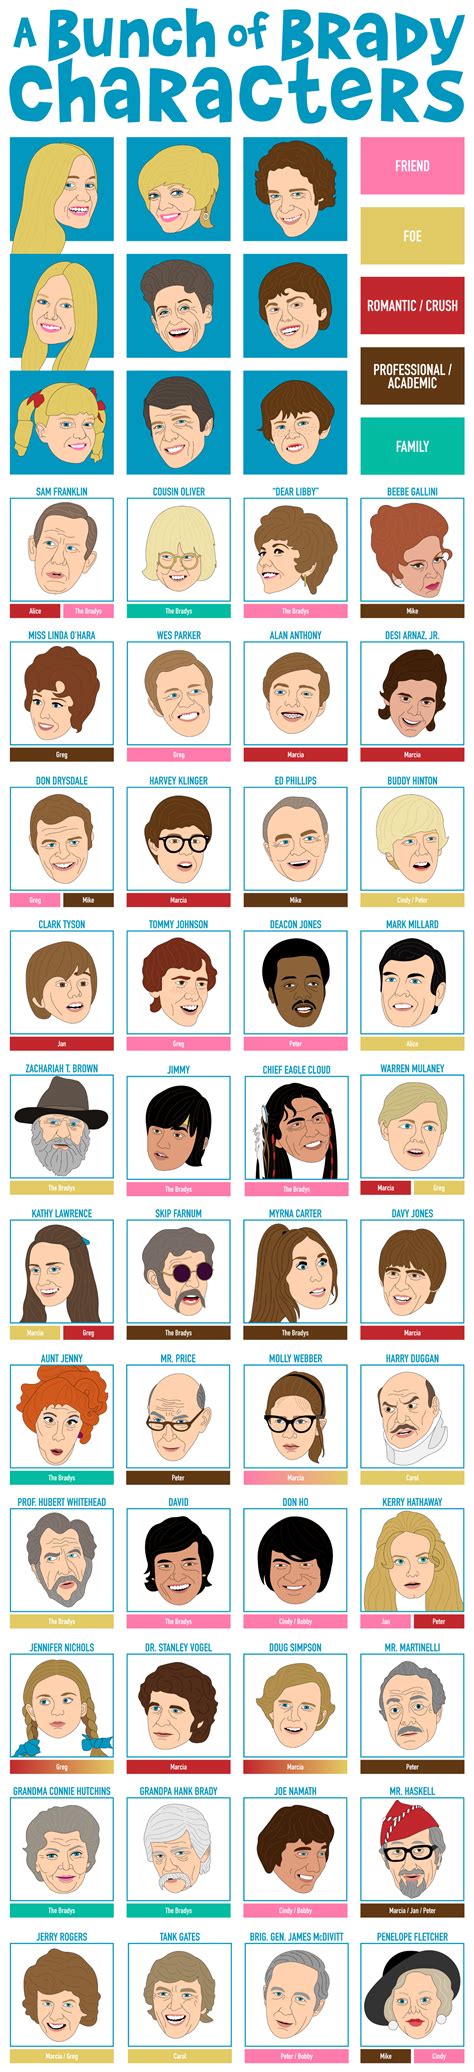 Keep Track Of The Minor Characters Of The Brady Bunch With This Handy